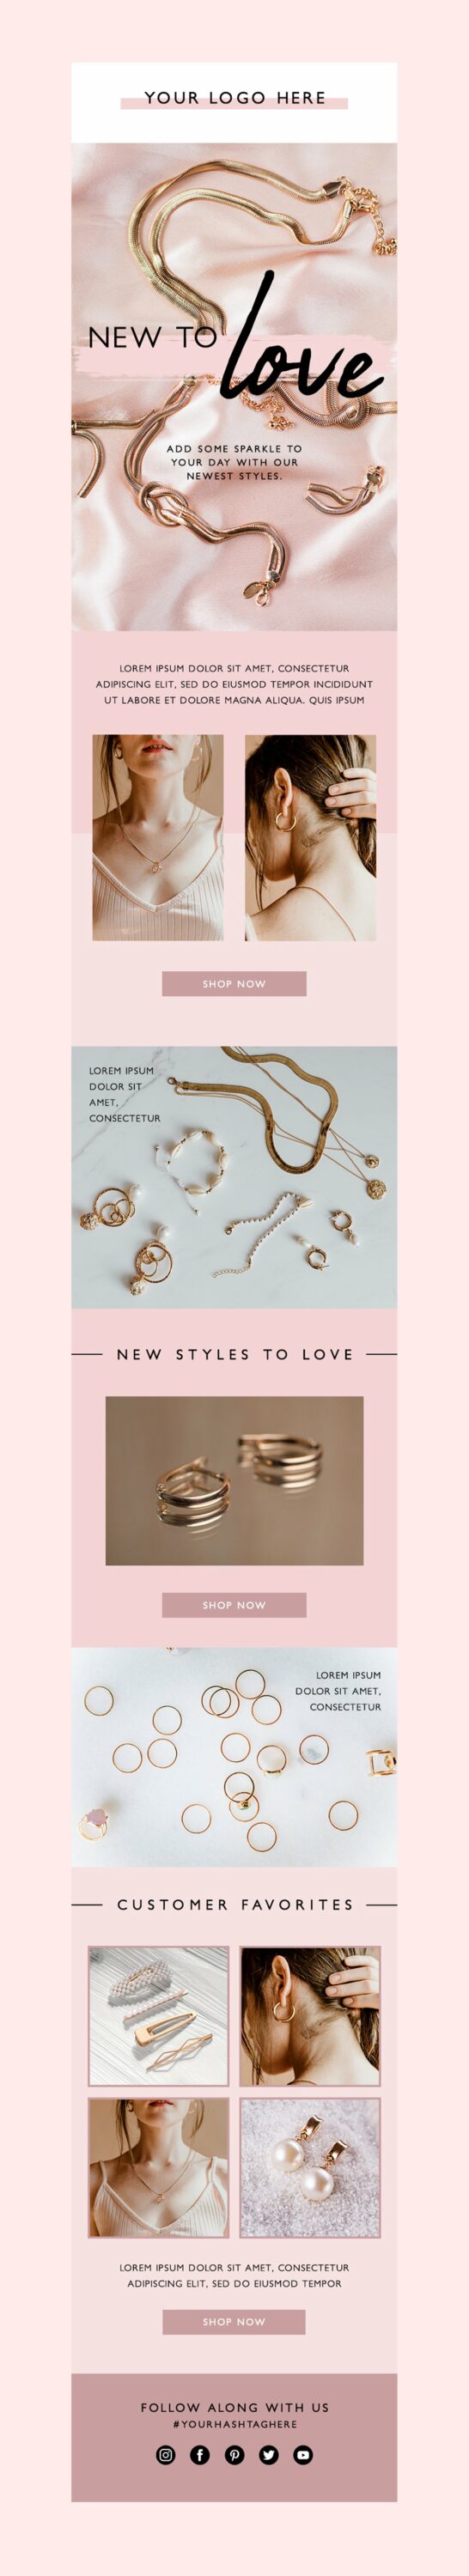 Image pack of adorable jewelry store email design template.